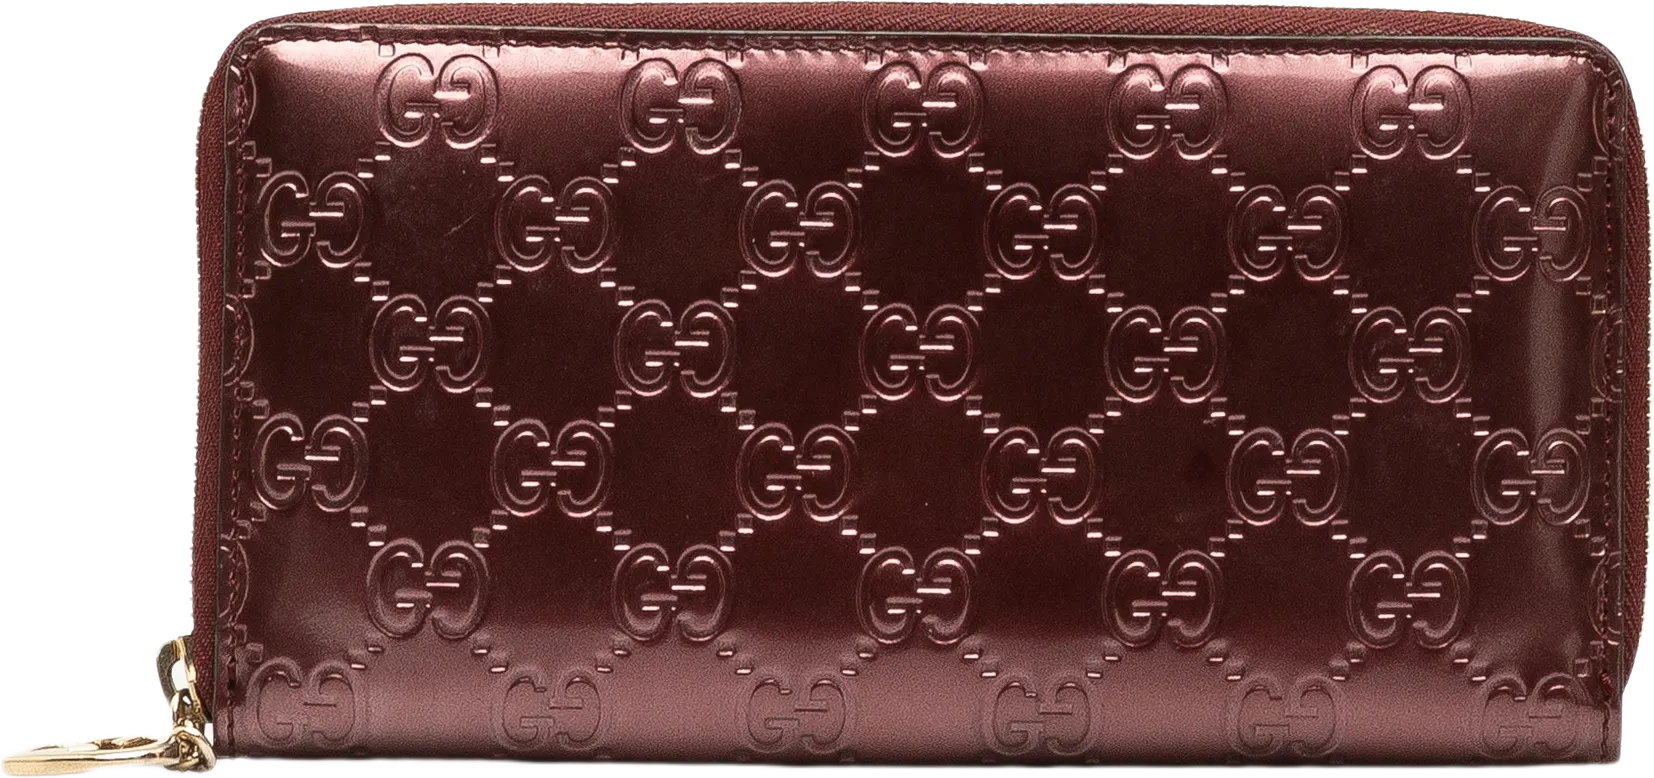 Gucci Guccissima Patent Zip Around Long Wallet